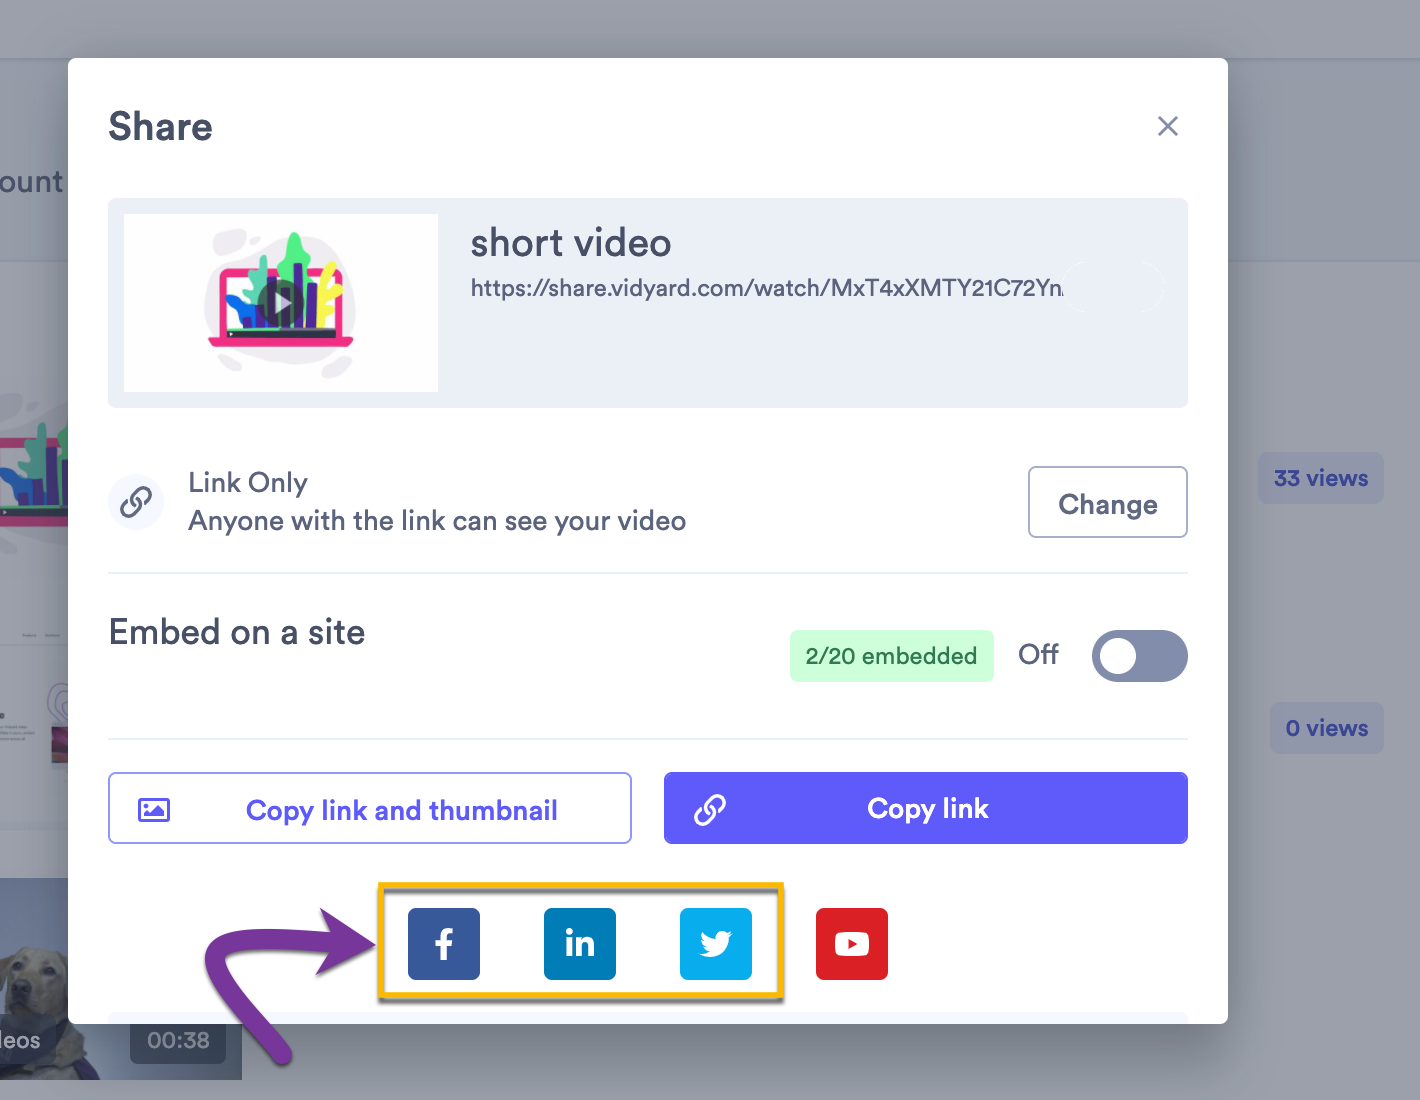 Selecting one the buttons for Facebook, LinkedIn or Twitter to share a video link directly to your social channels